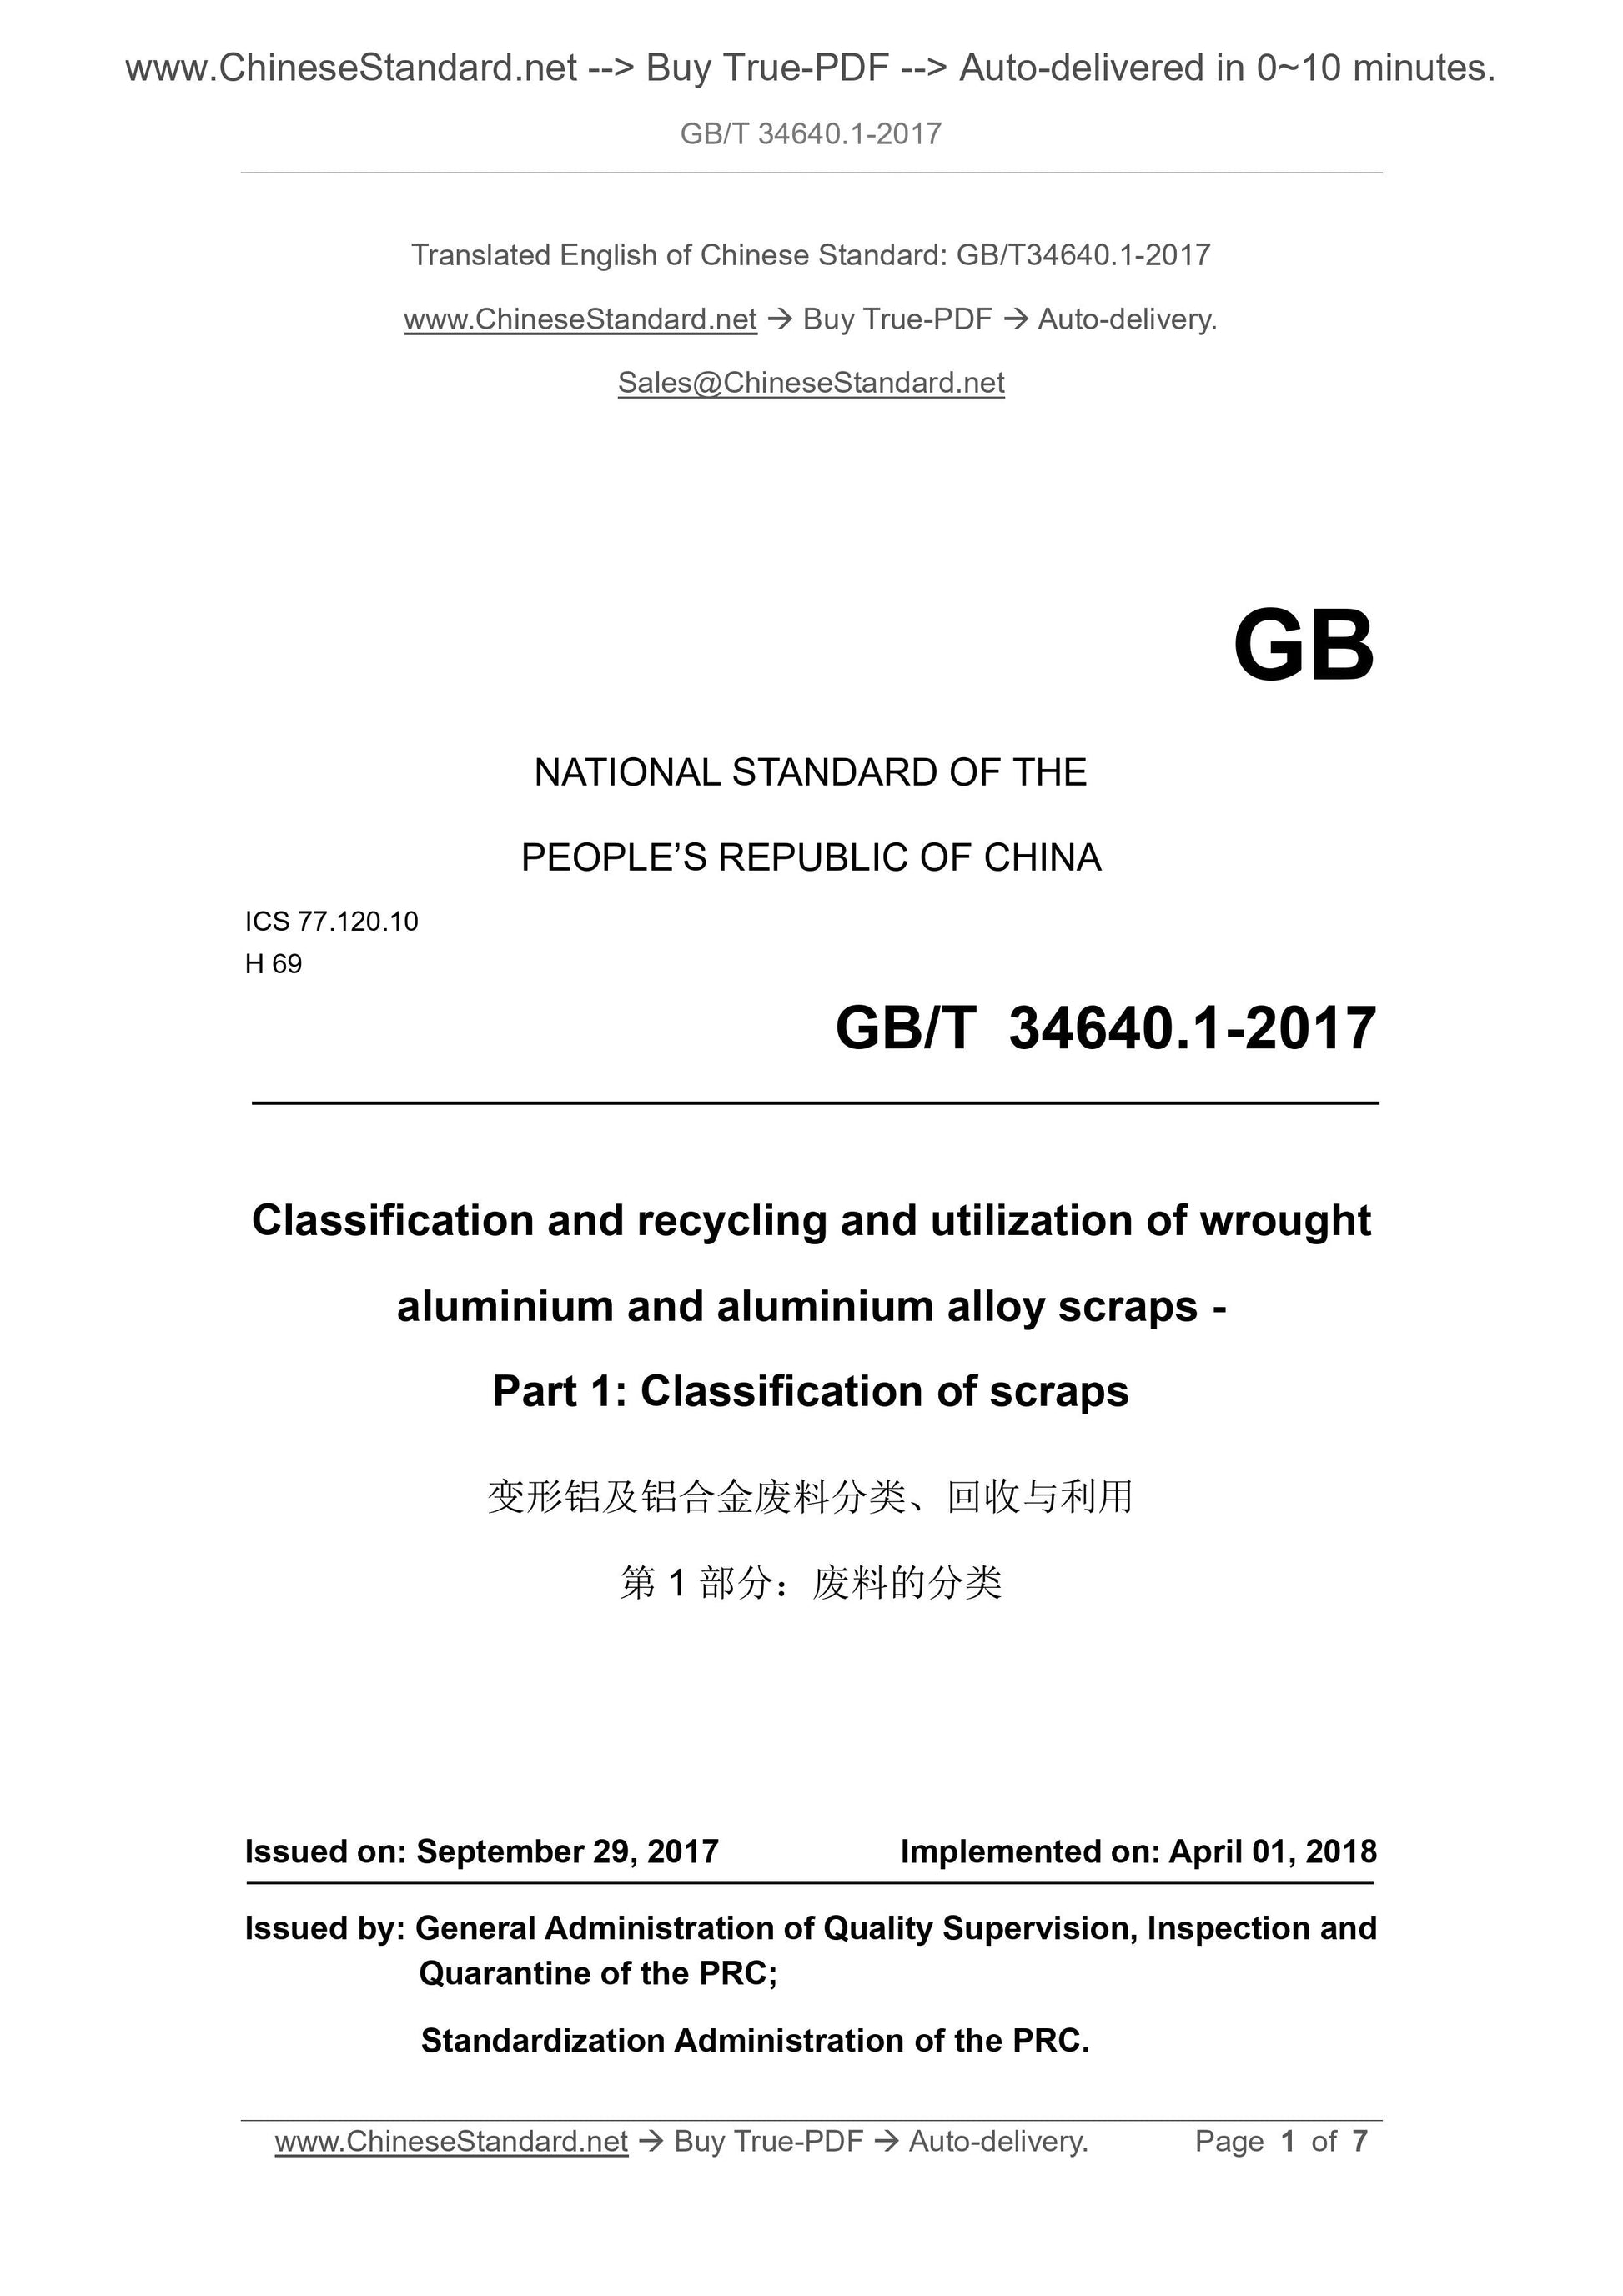 GB/T 34640.1-2017 Page 1